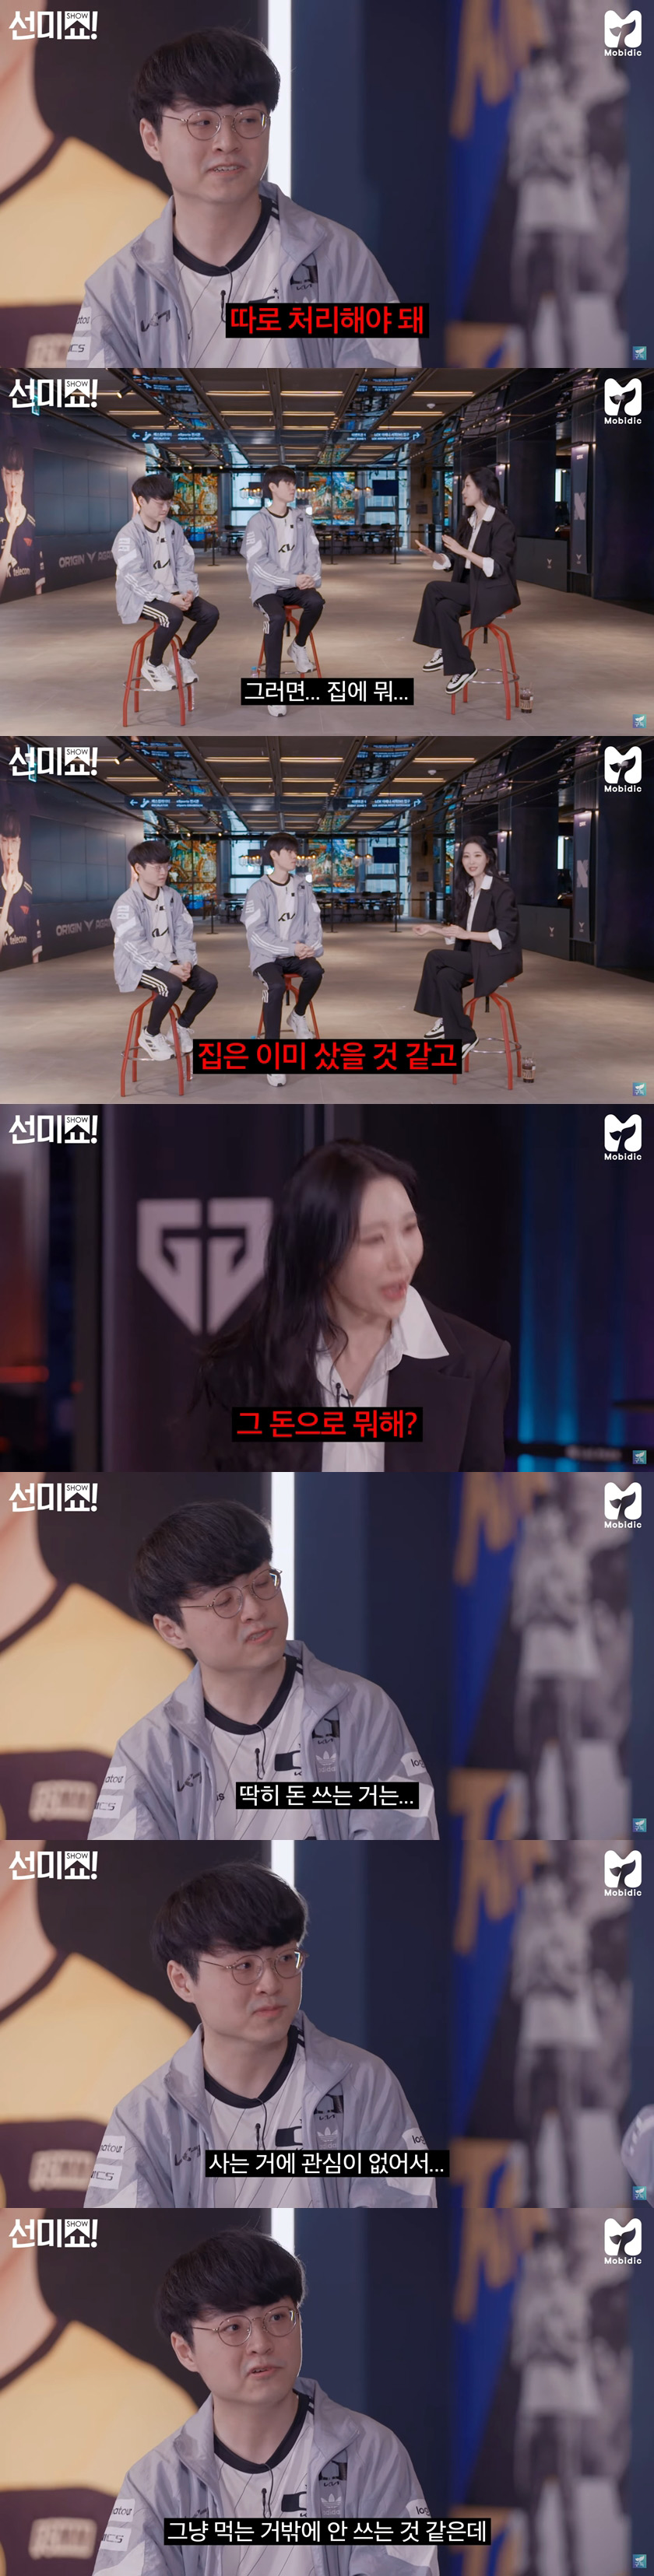 Sunmi is really surprised to hear Deft and Showmaker's salary.